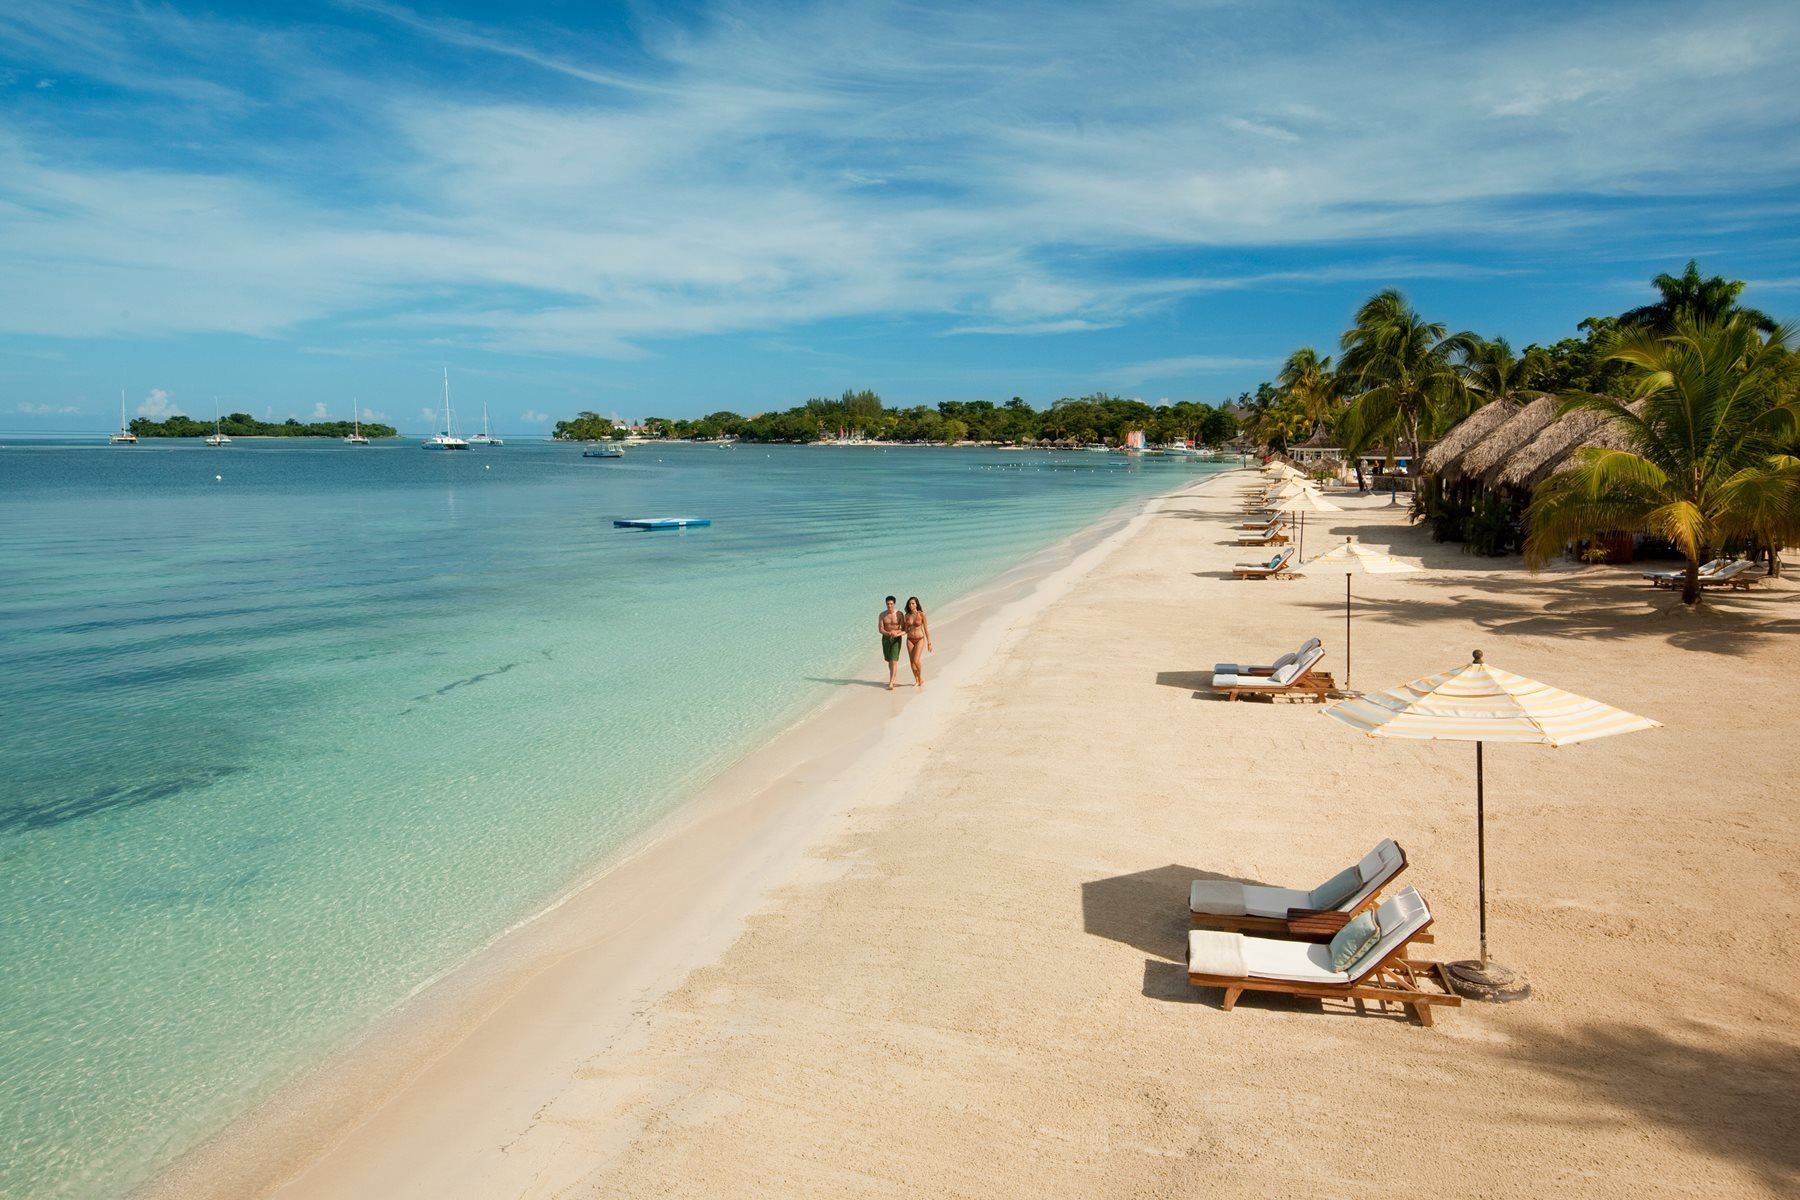 Sandals Negril: Book at the best